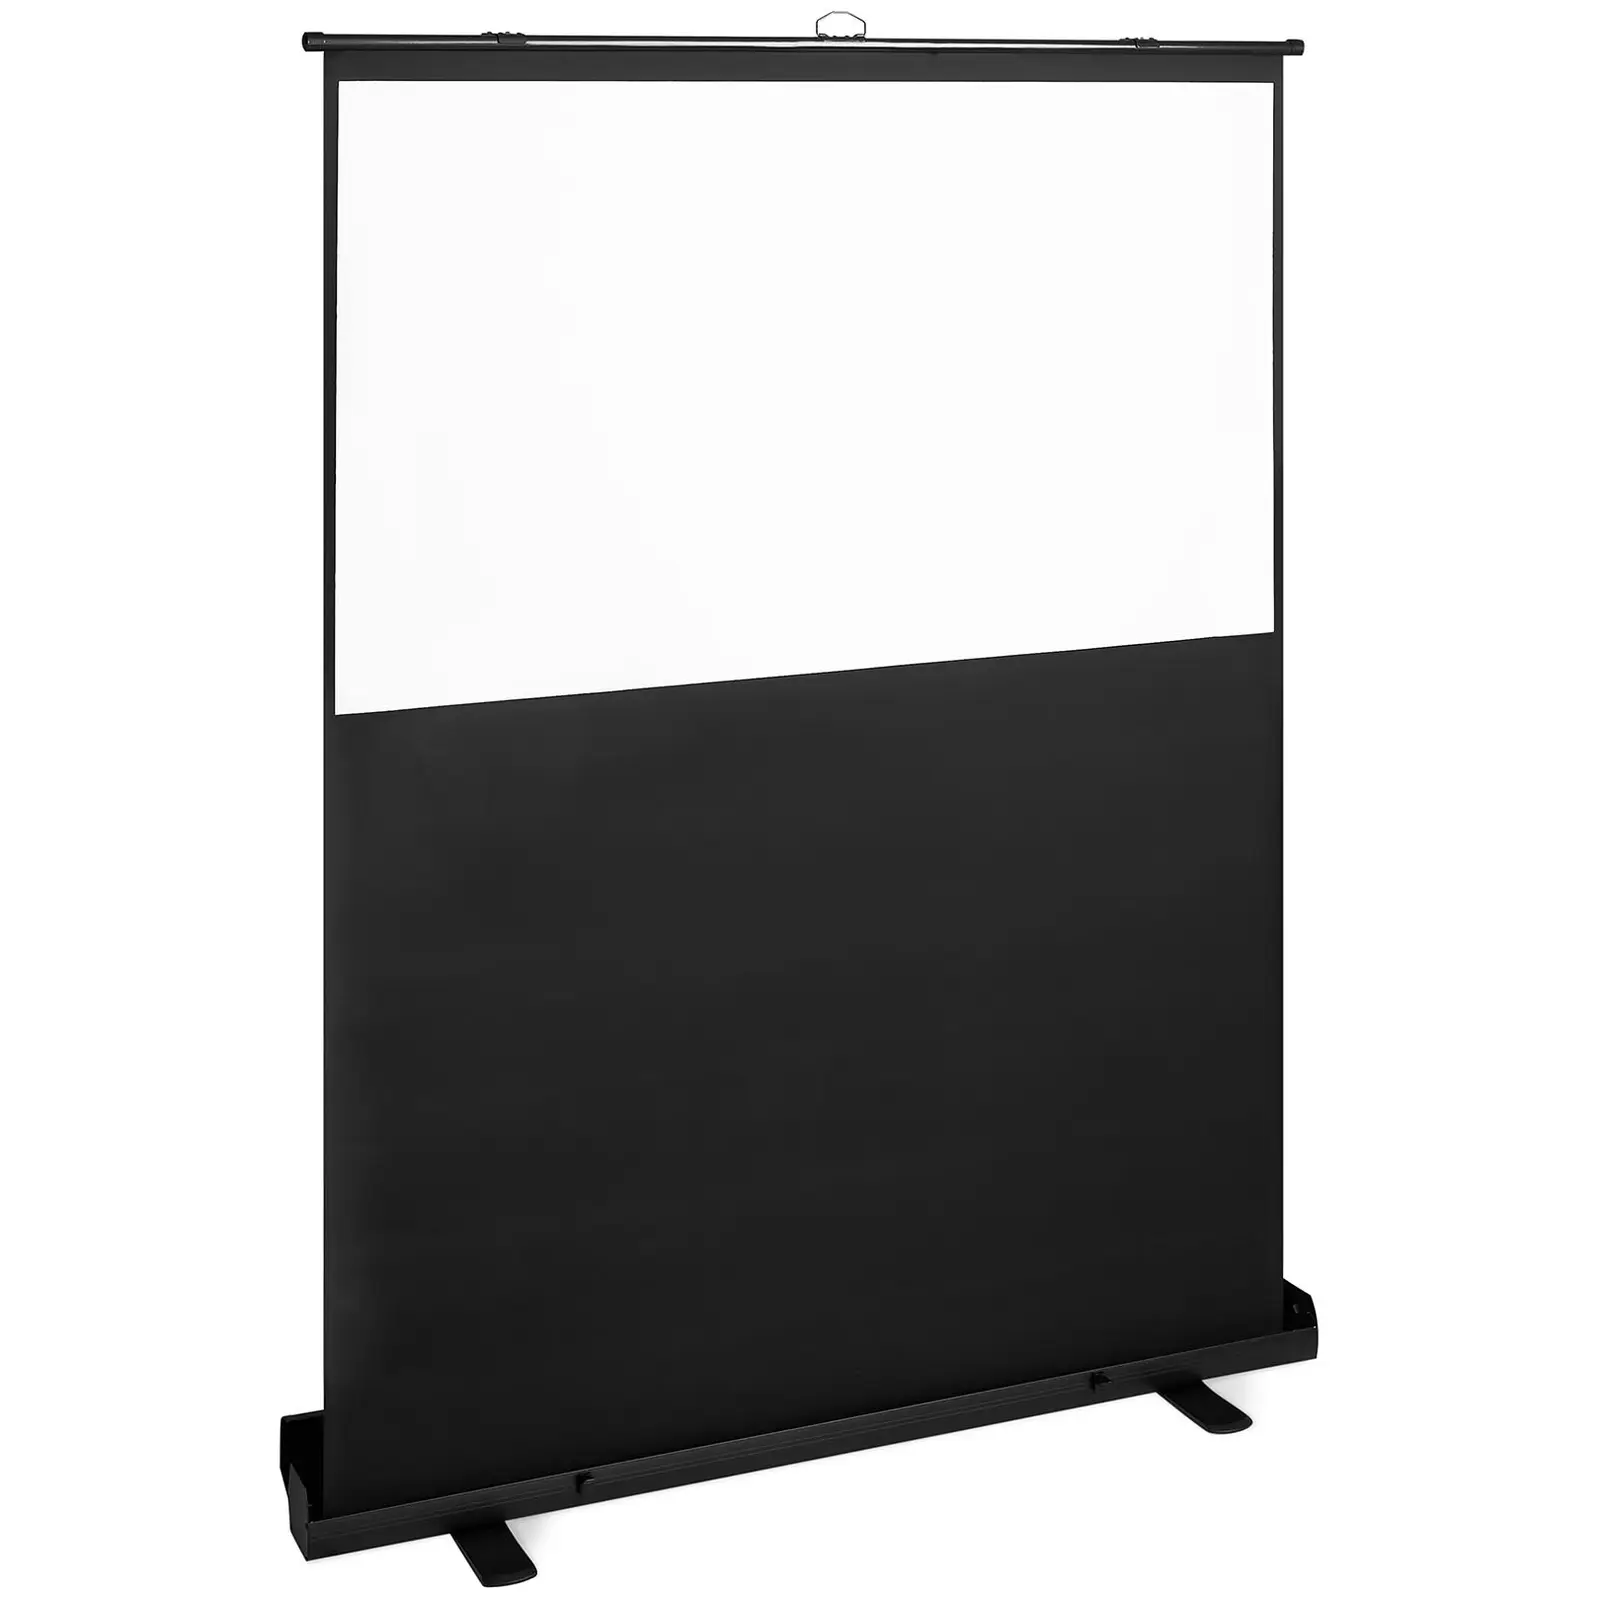 Roll-up Projector Screen - 166.5 x 203 cm - 16:9 - mobile